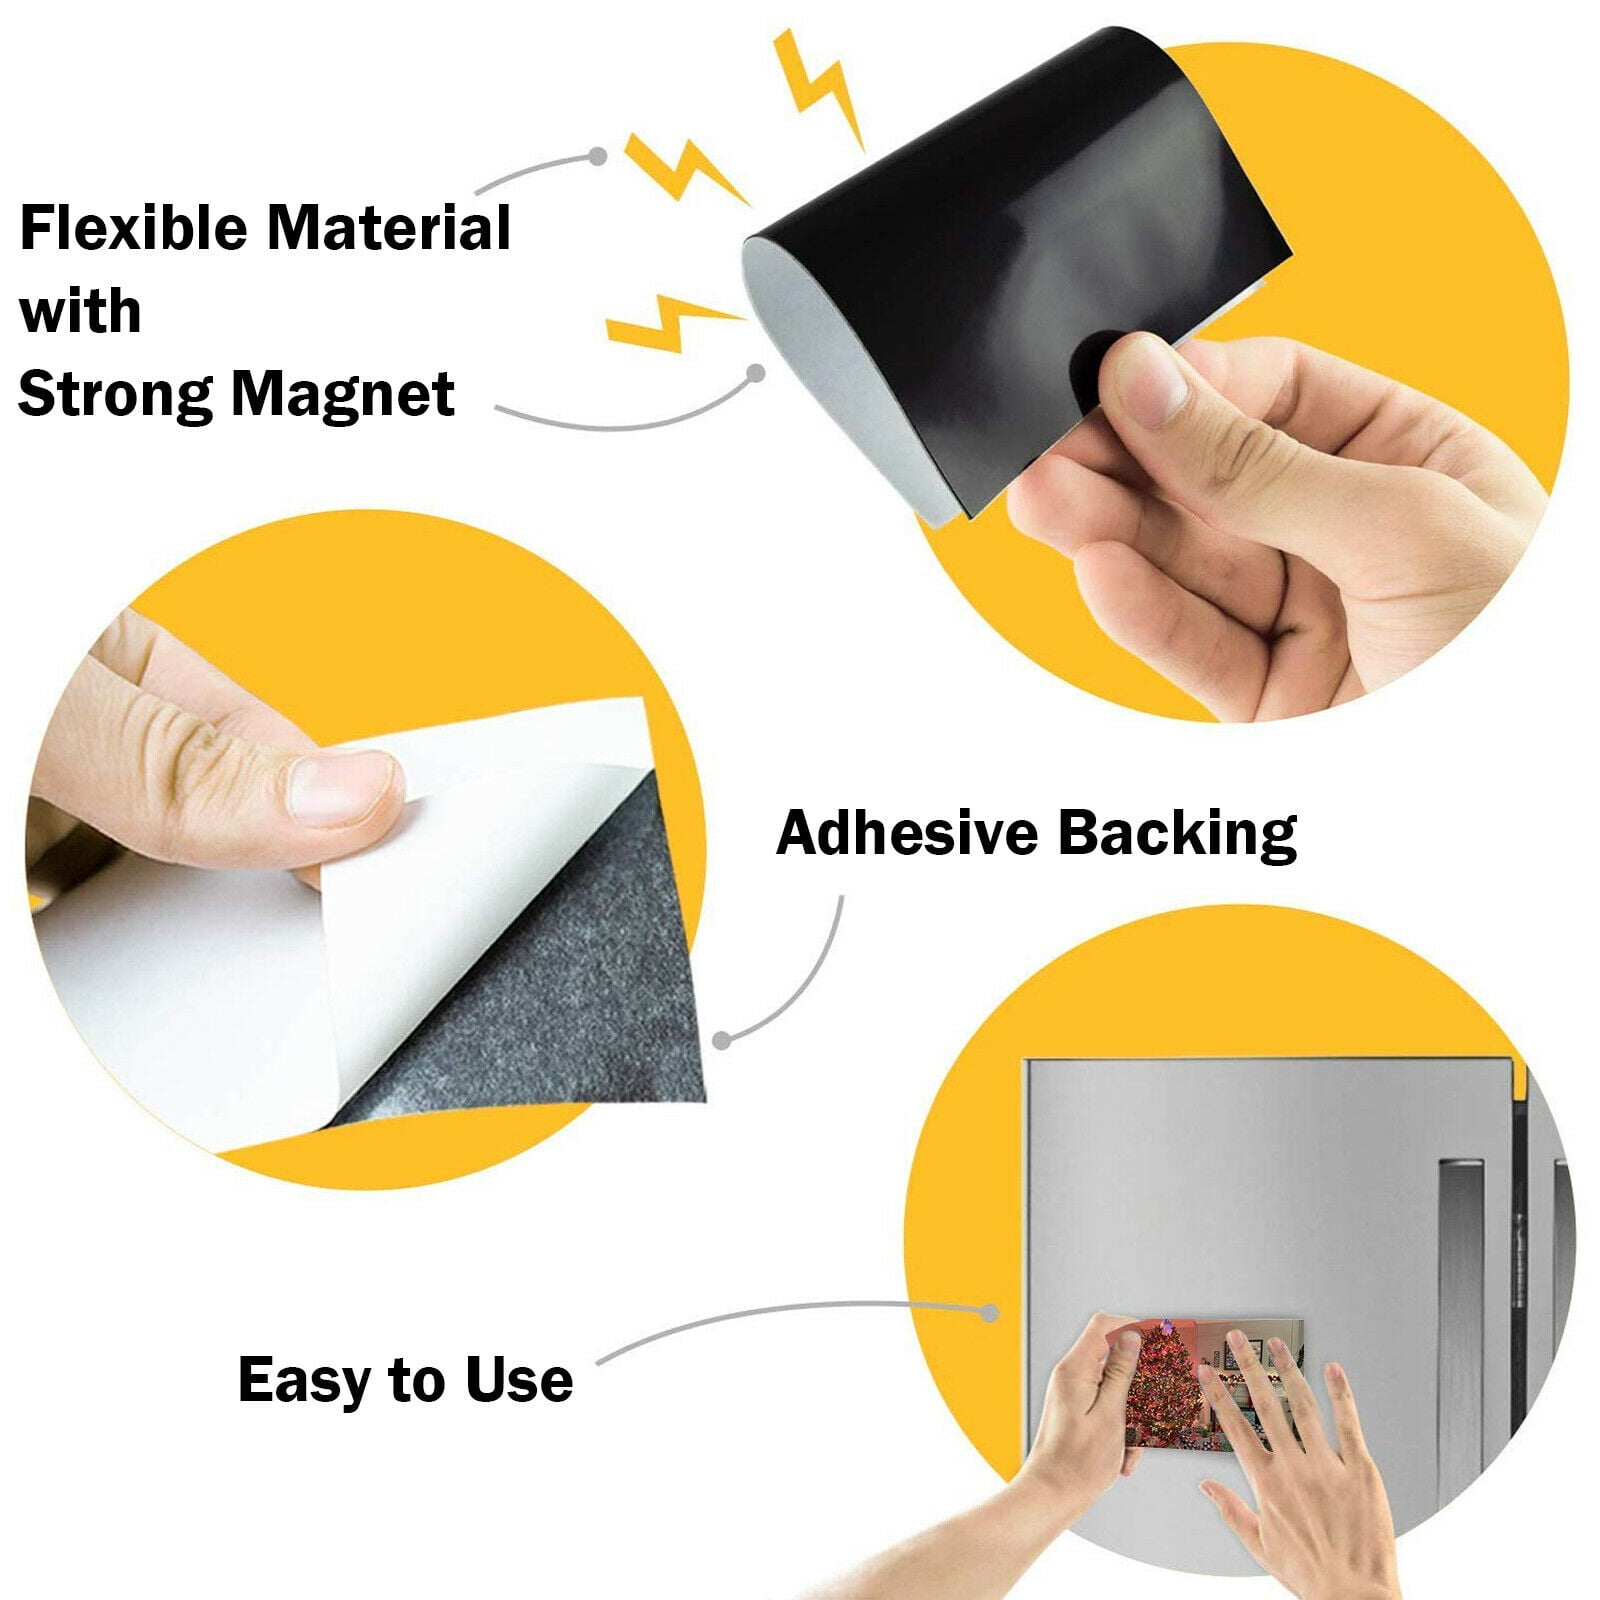  Yahenda 40 Sheets Adhesive Magnetic Sheets 4 x 6 Inch Cuttable  Magnets for Crafts Easy Peel and Stick Flexible Magnetic Paper with Self  Adhesive Backing for Photos Picture Stamp Metal Die